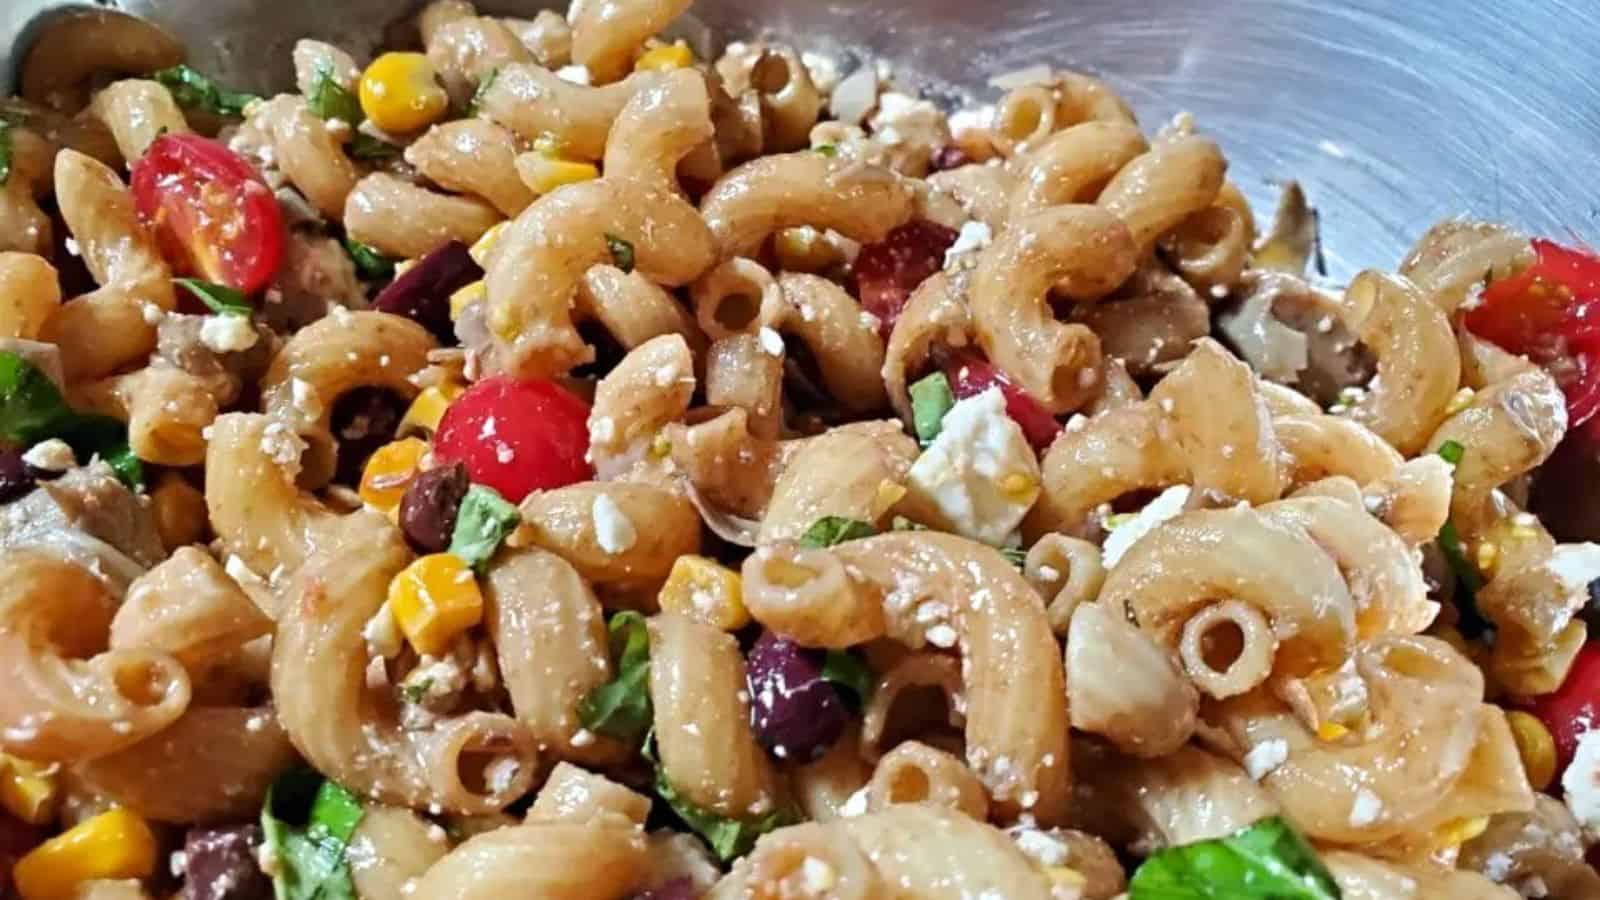 Image shows a closeup of a Summer Pasta Salad with Mediterranean flavors.